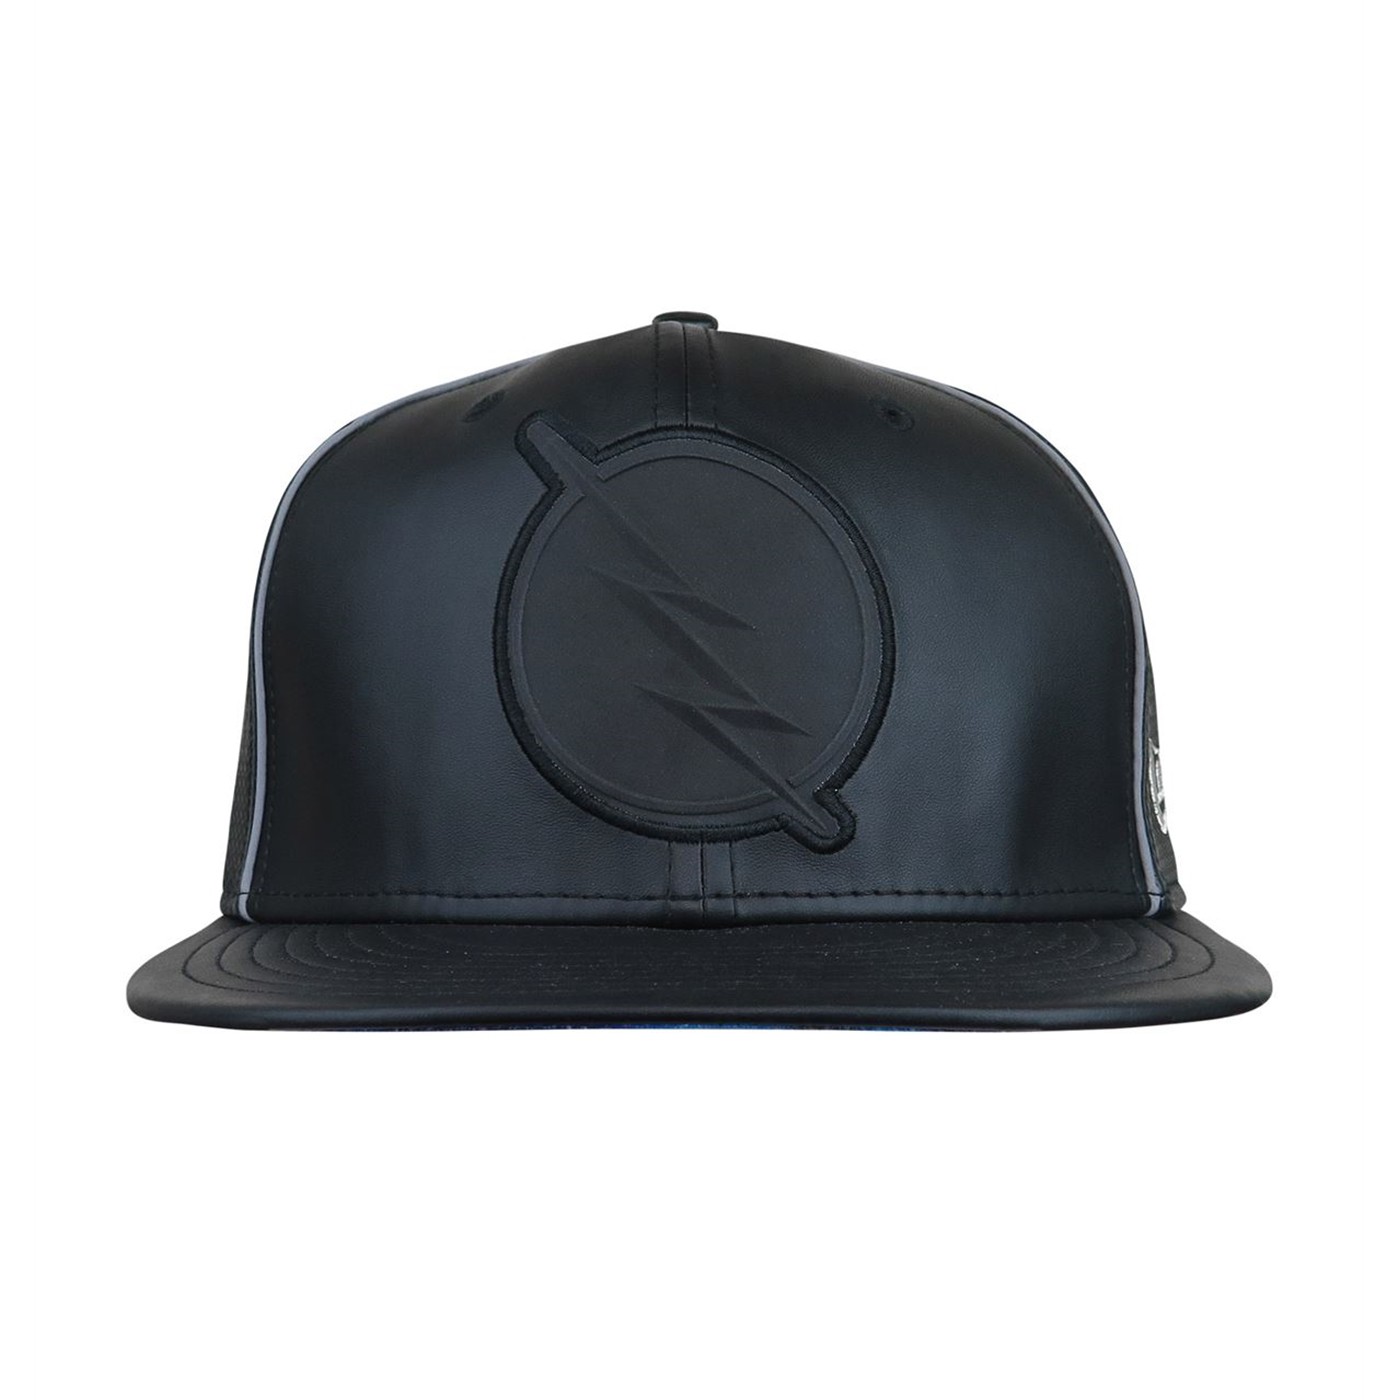 Flash Zoom Reflective Armor 59Fifty Fitted Hat